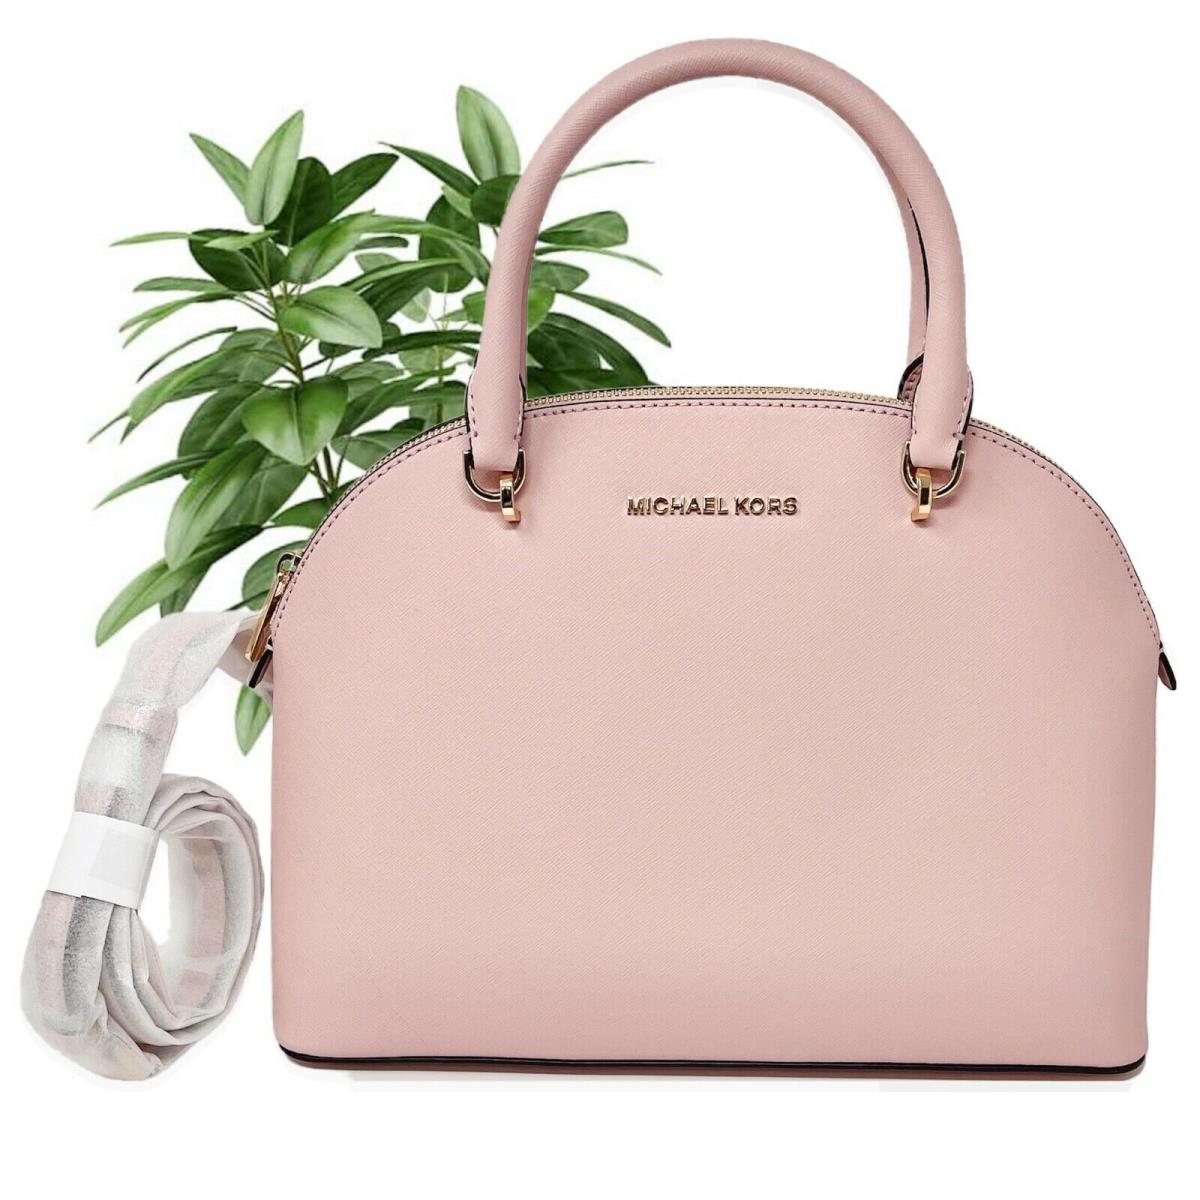 Michael Kors Emmy Large Dome Satchel in Blossom, 192877715429 - Michael  Kors bag Dome - Blossom Exterior